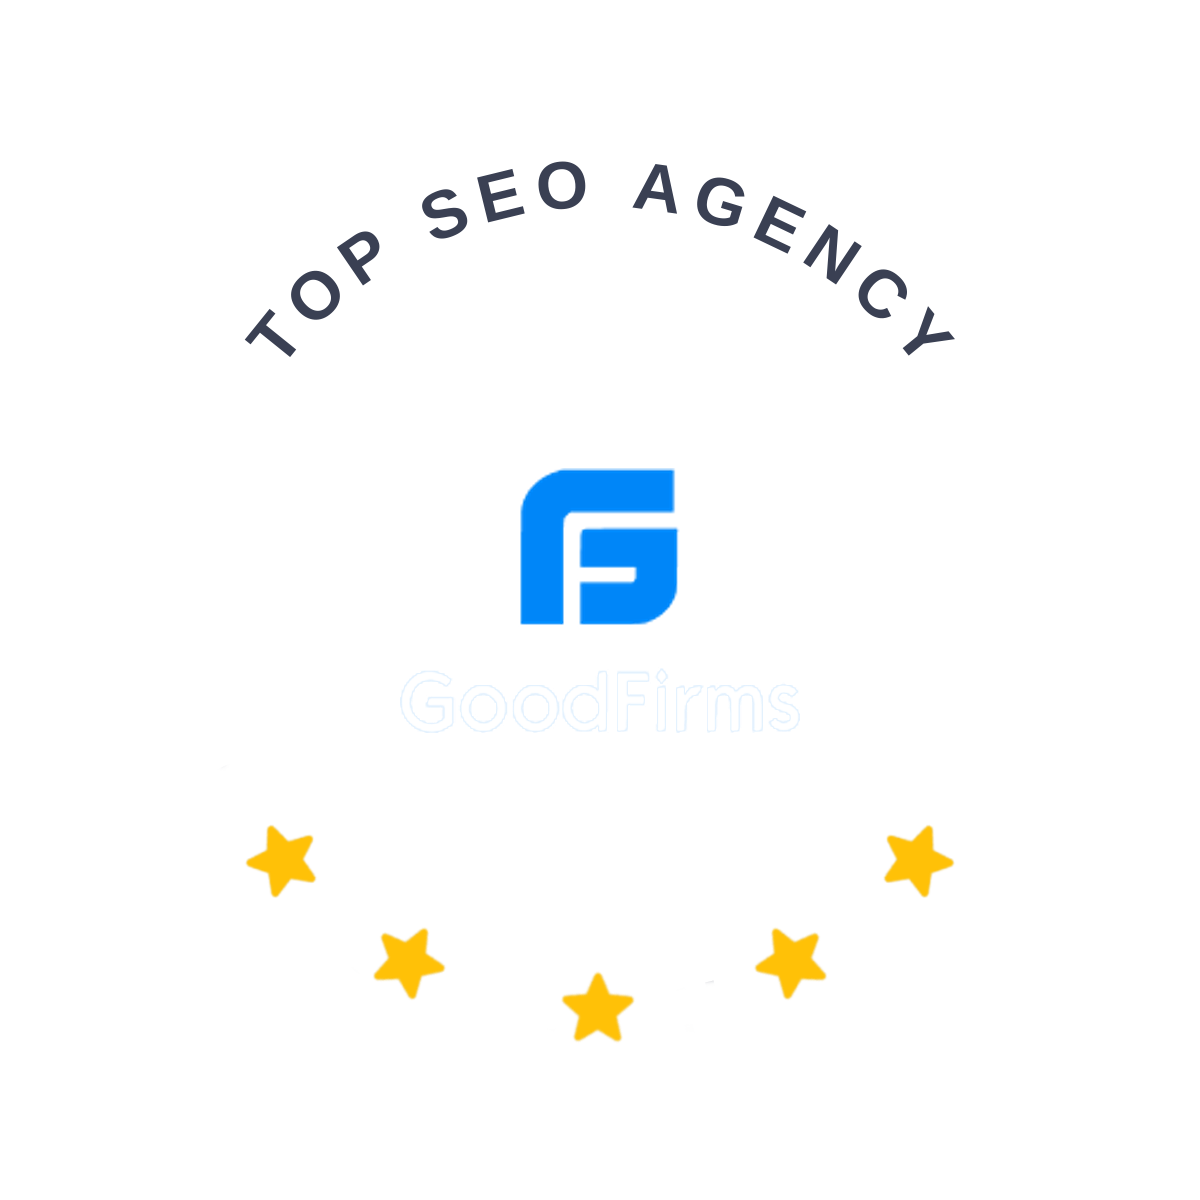 Top SEO Agency featured on Good Firms